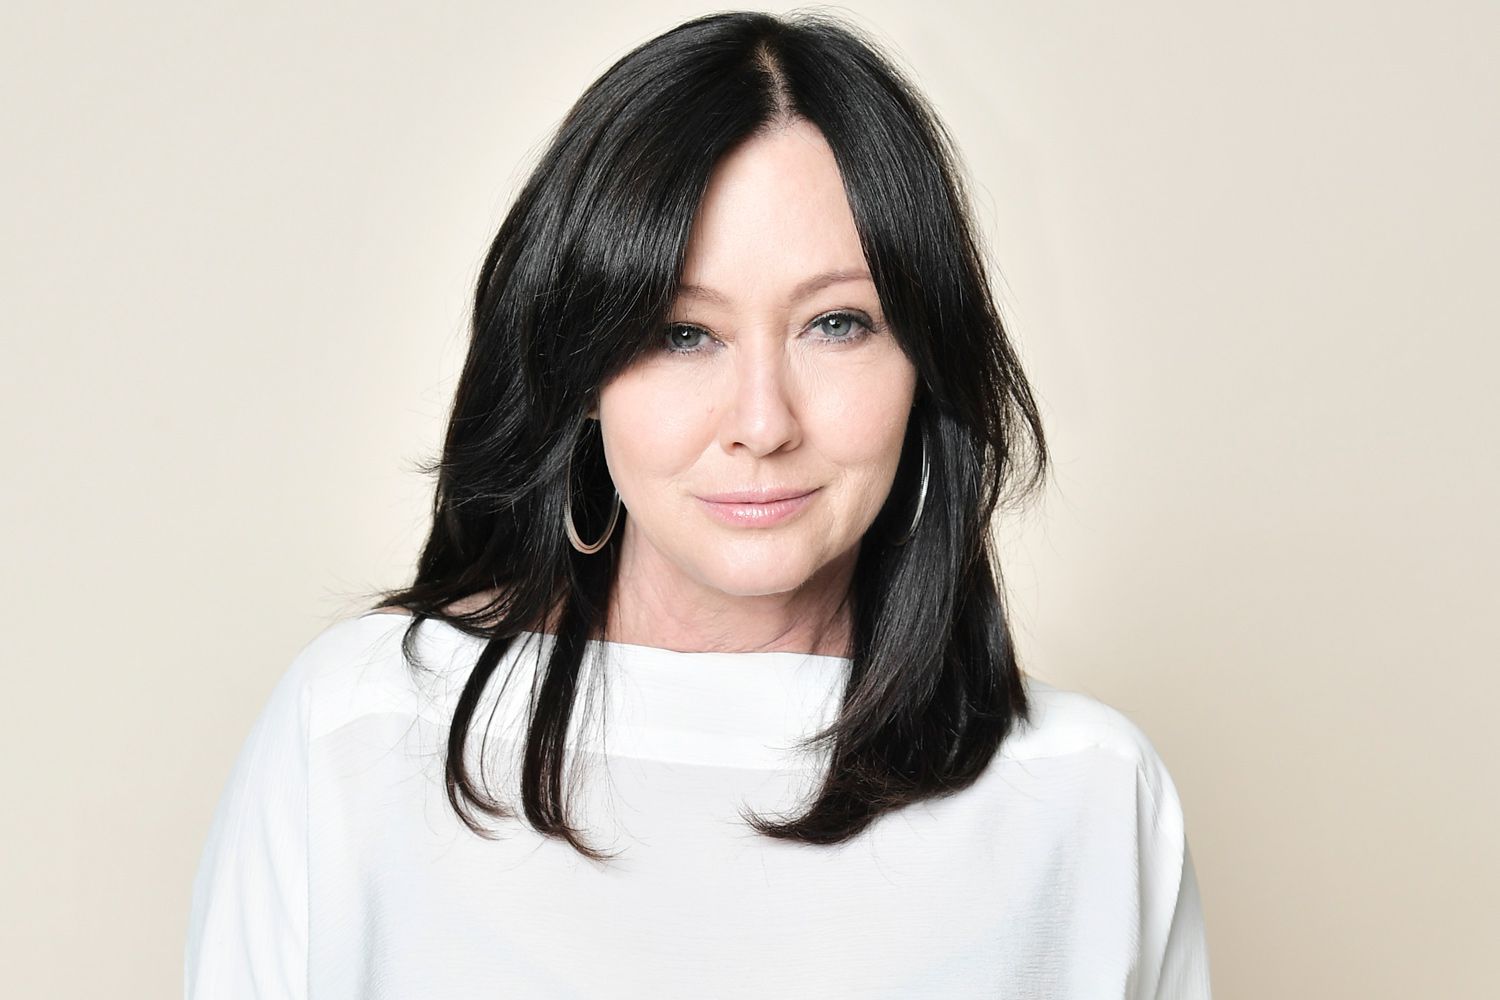 Shannen Doherty Gives Update on ‘Really Hard’ Divorce, Starting Chemo [Video]